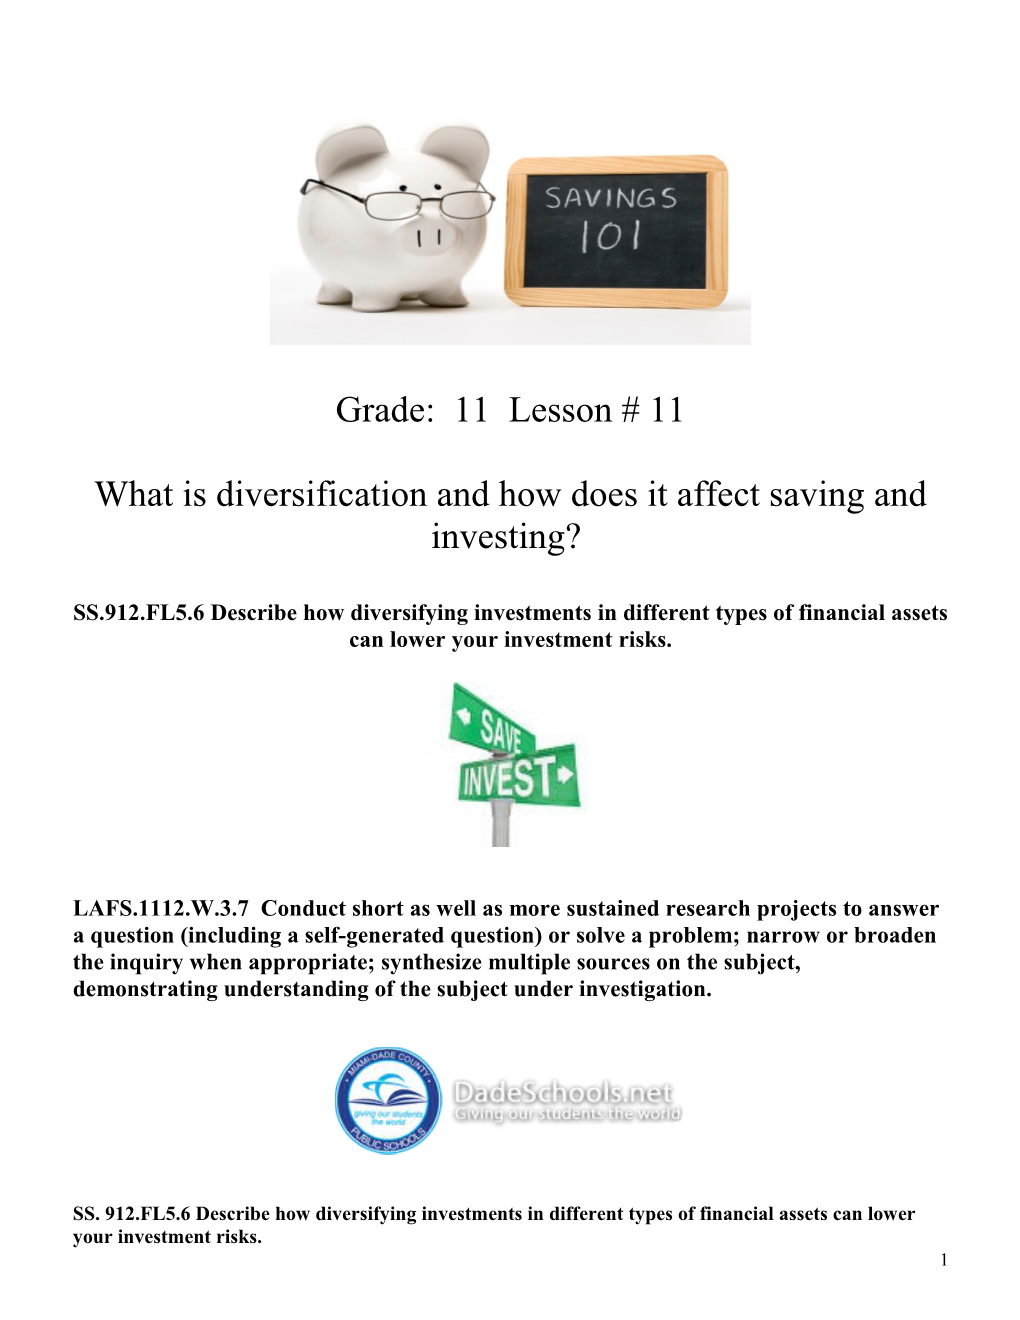 What Is Diversification and How Does It Affect Saving and Investing?